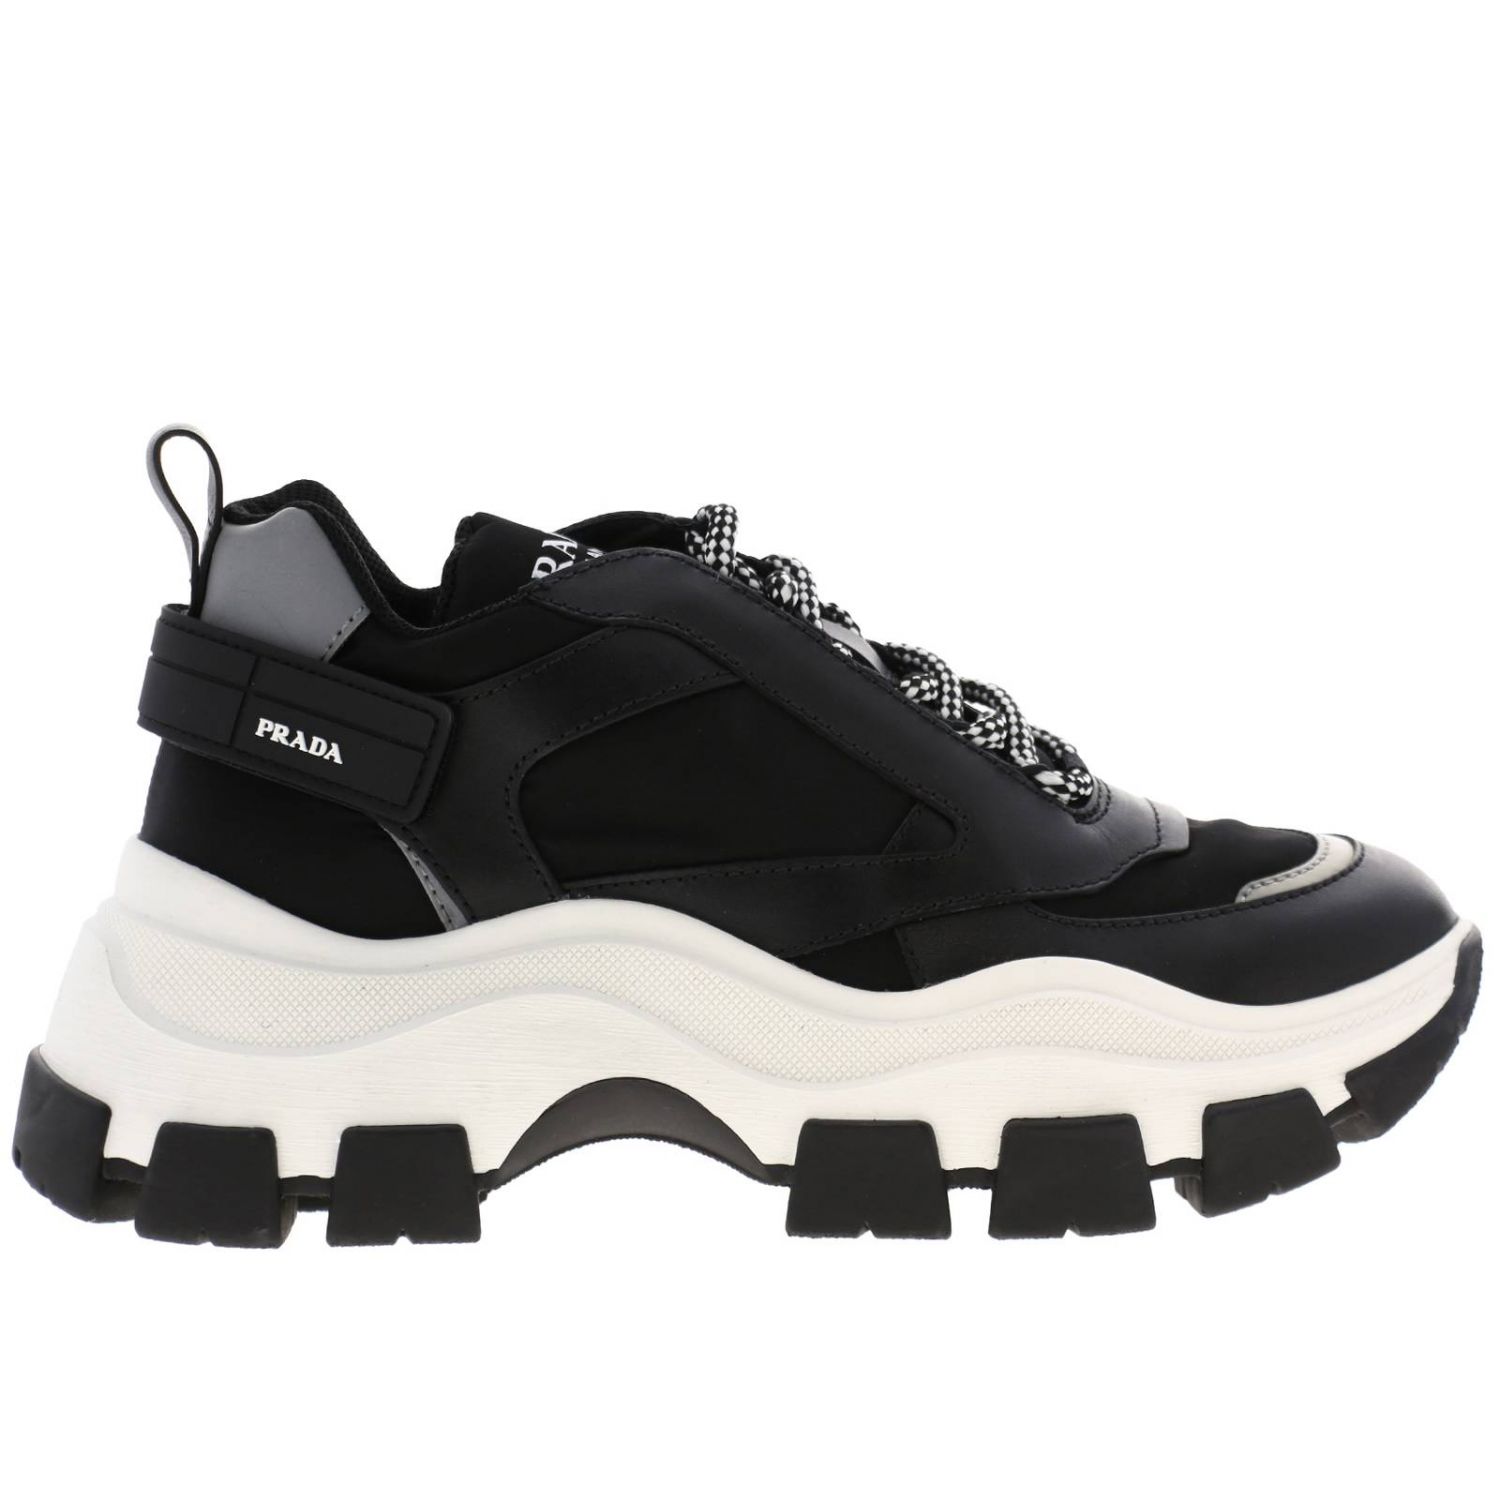 PRADA: Pegasus lace-up sneakers in leather and nylon with logo